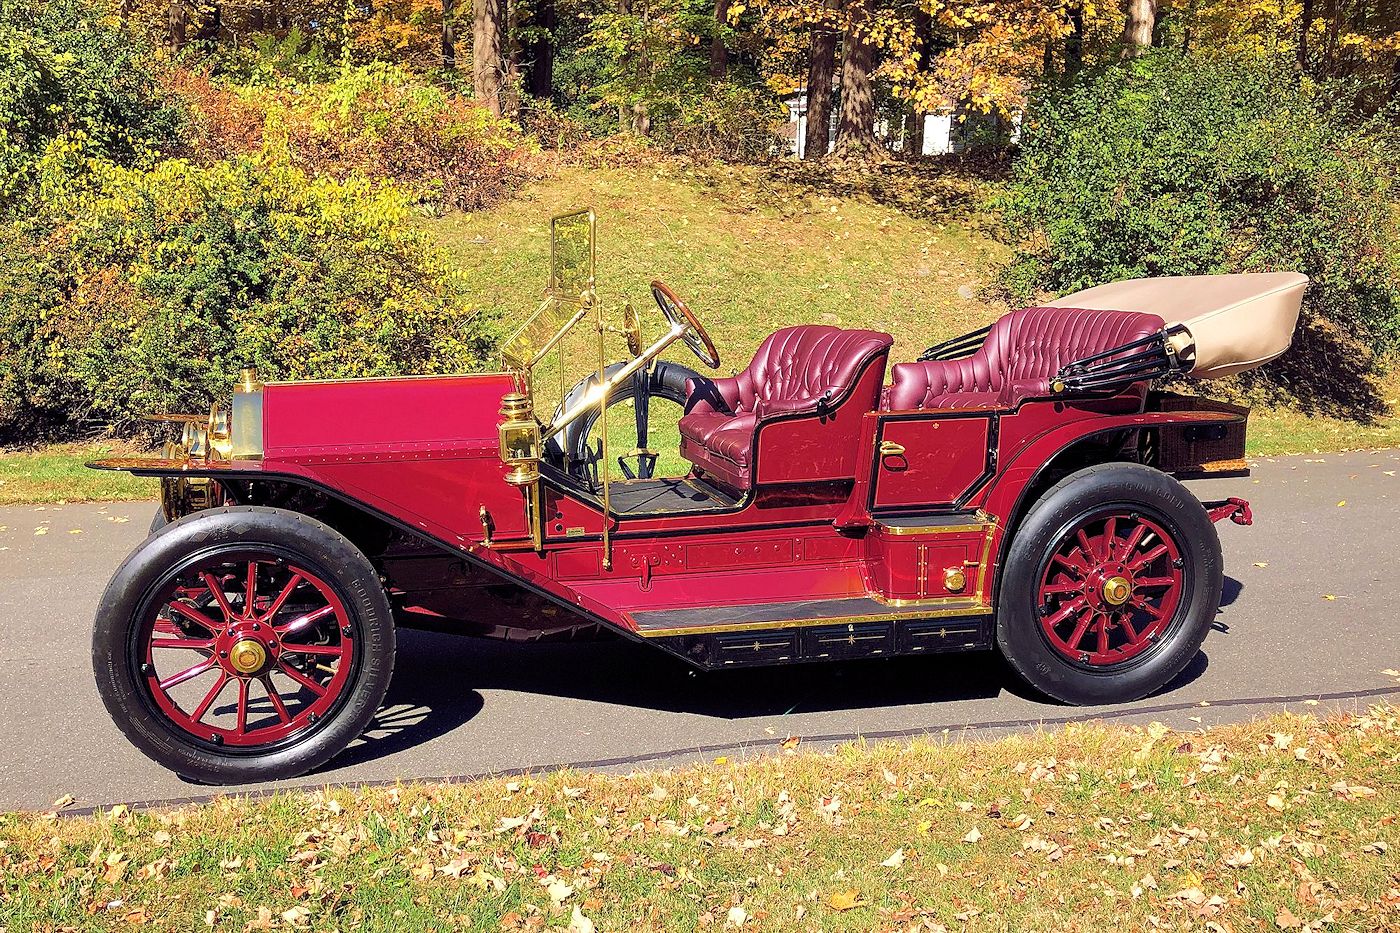 1910 Simplex Chassis #50-10351